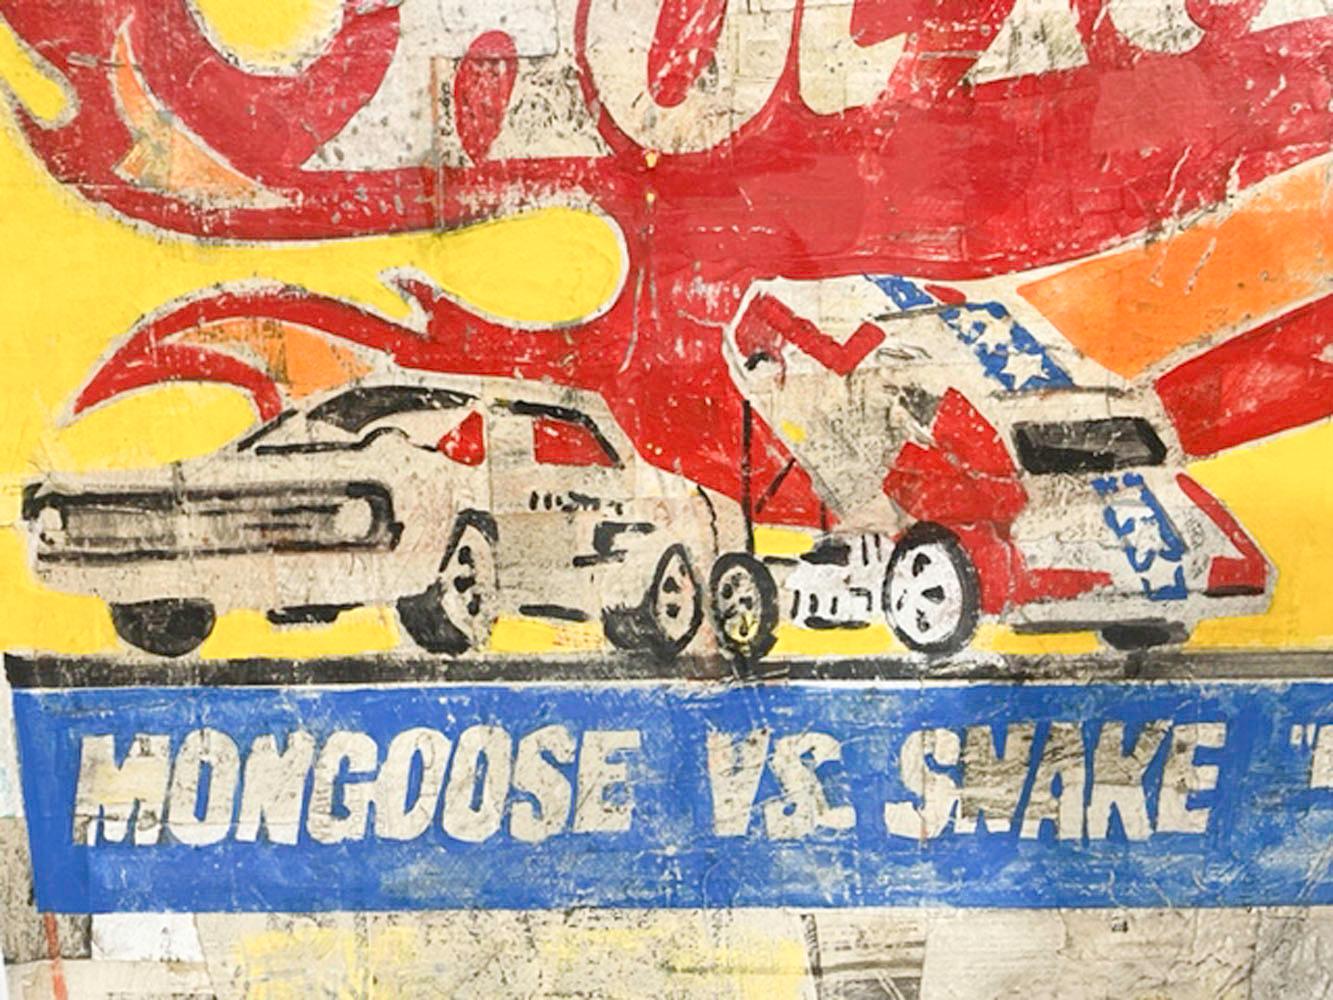 American Contemporary Pop Art 'Hot Wheels, Mongoose vs. Snake' Oil & Paper on Canvas For Sale